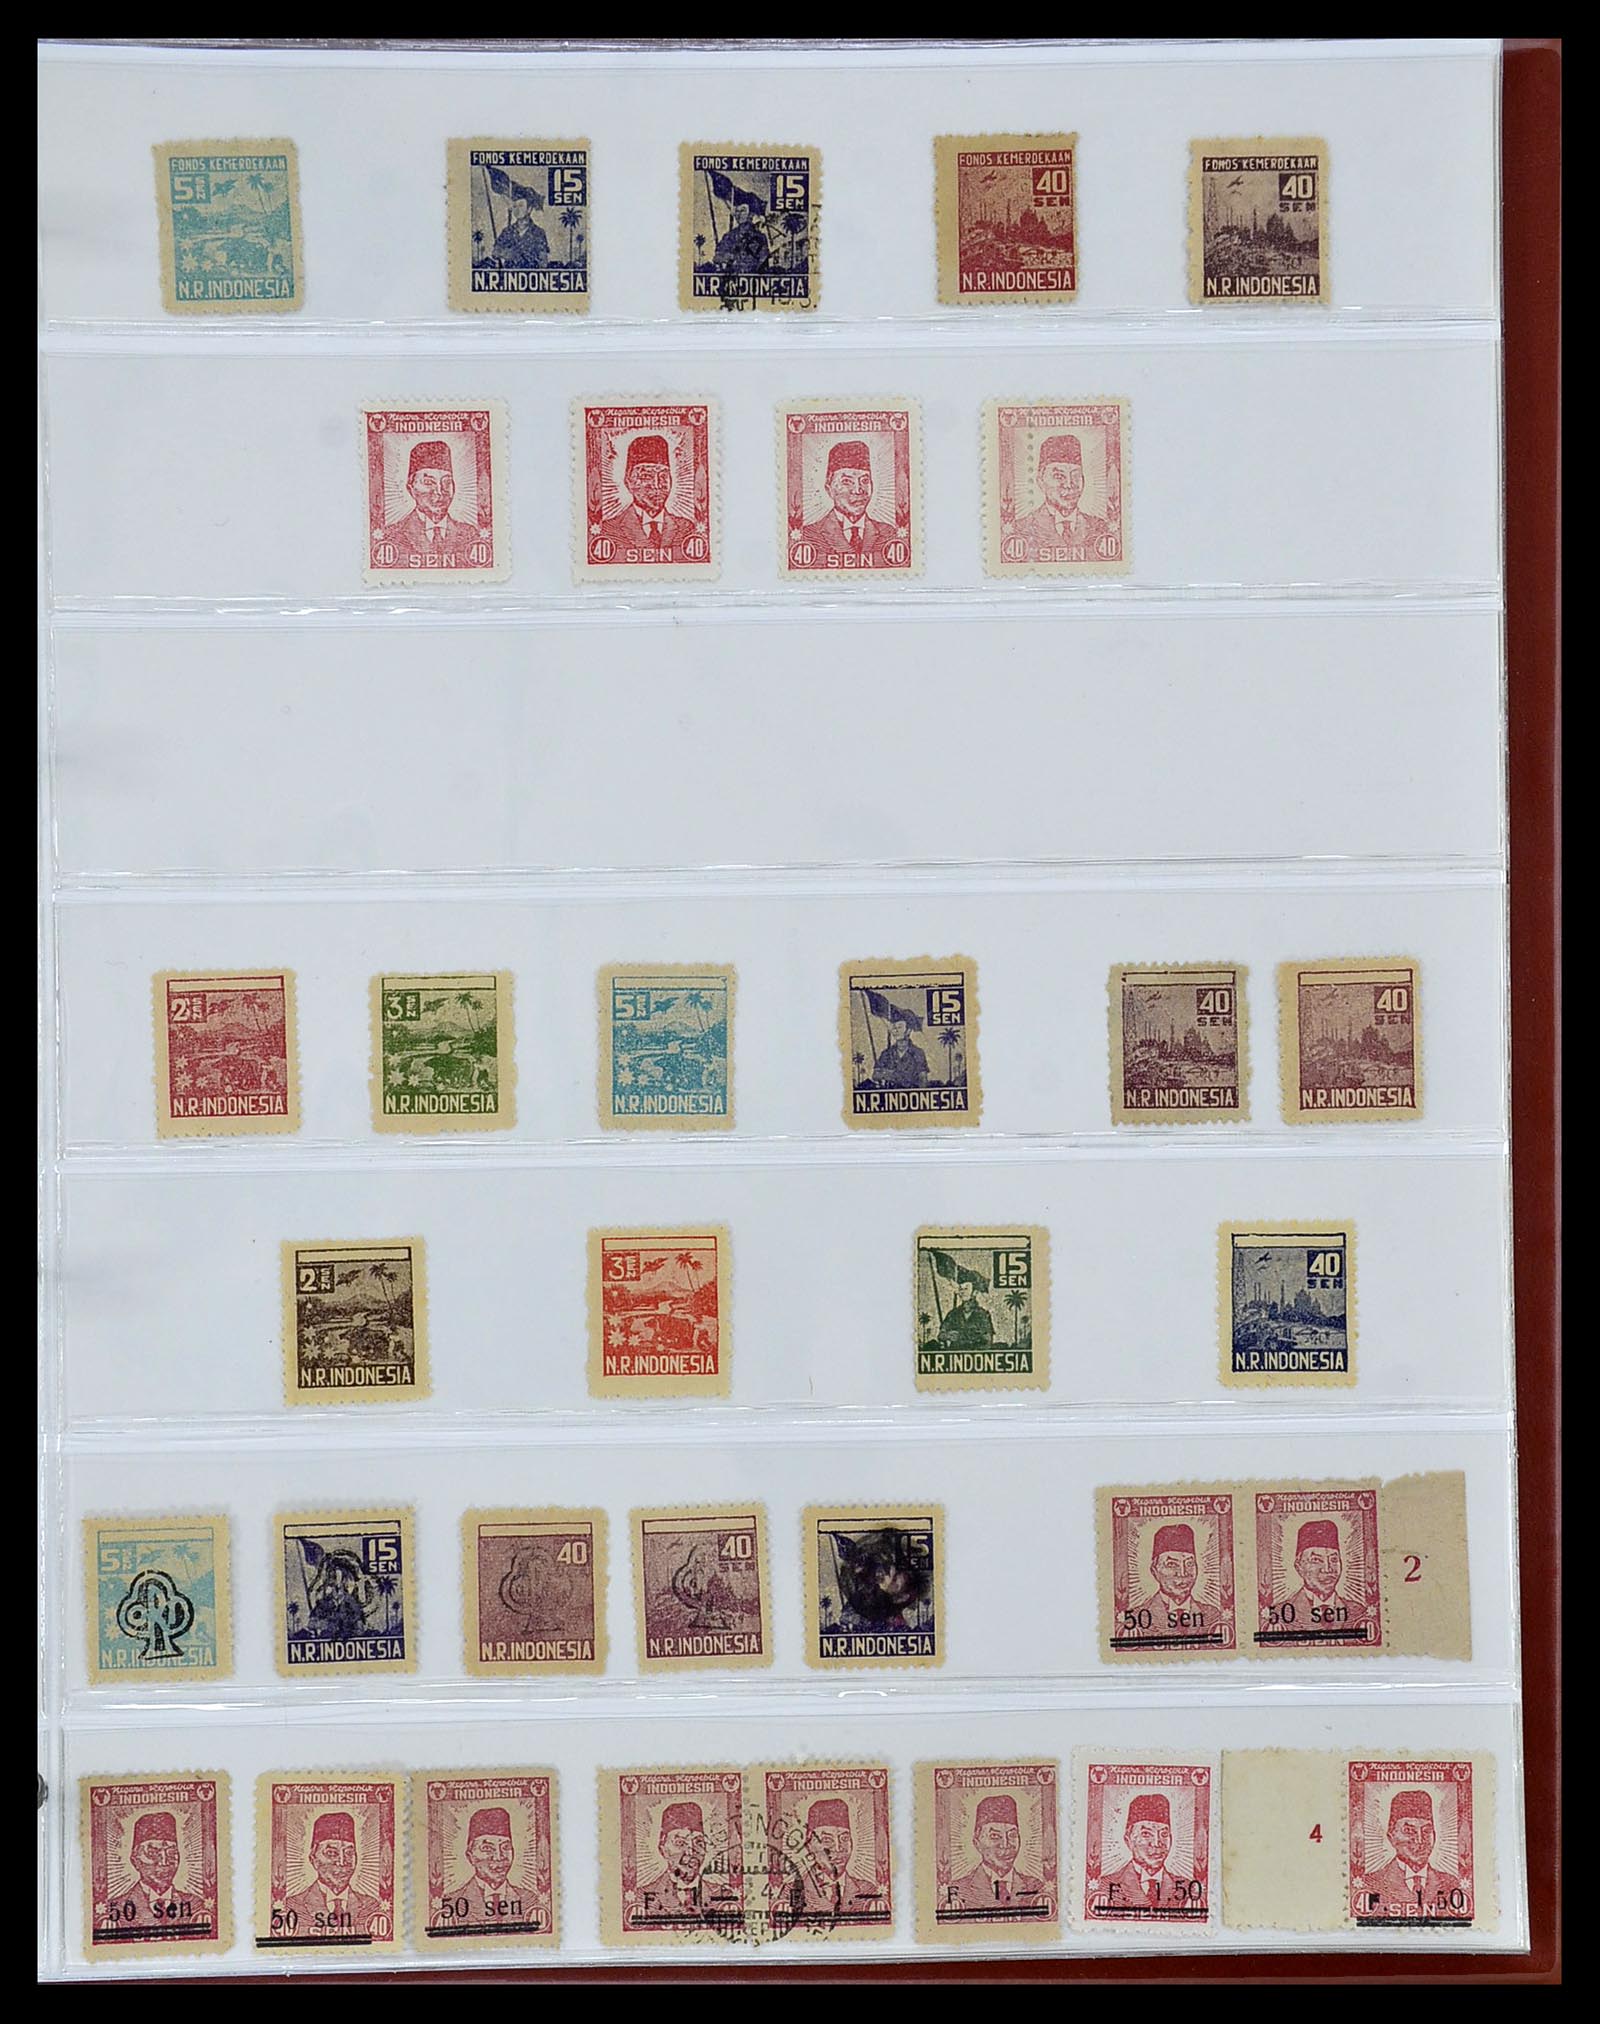 34545 081 - Stamp Collection 34545 Japanese Occupation of the Dutch East Indies and 